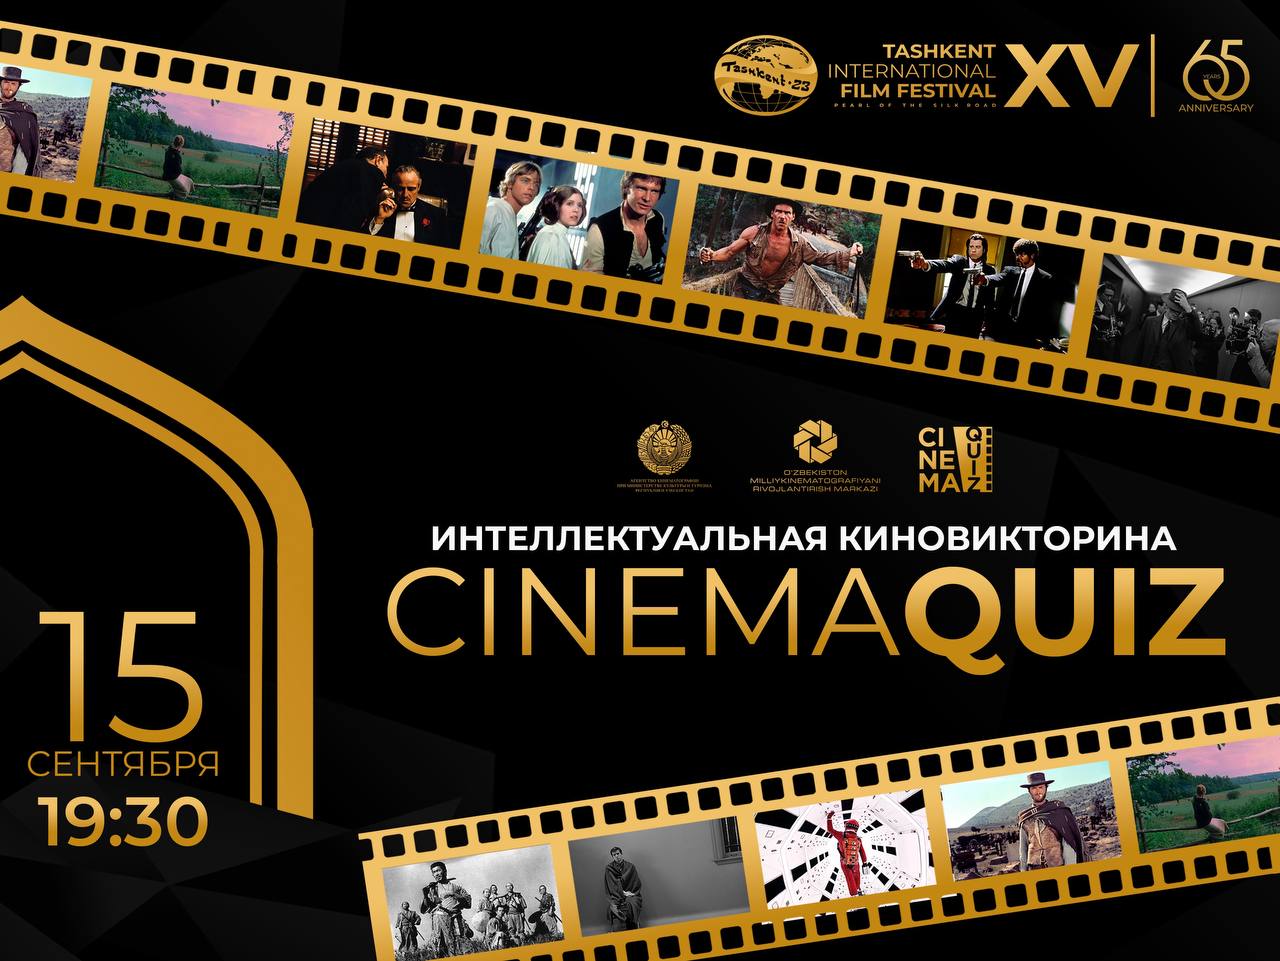 “CinemaQuiz" quiz will be held on 15 September within the framework of the special project "Creative Meetings" in the XV Tashkent International Film Festival